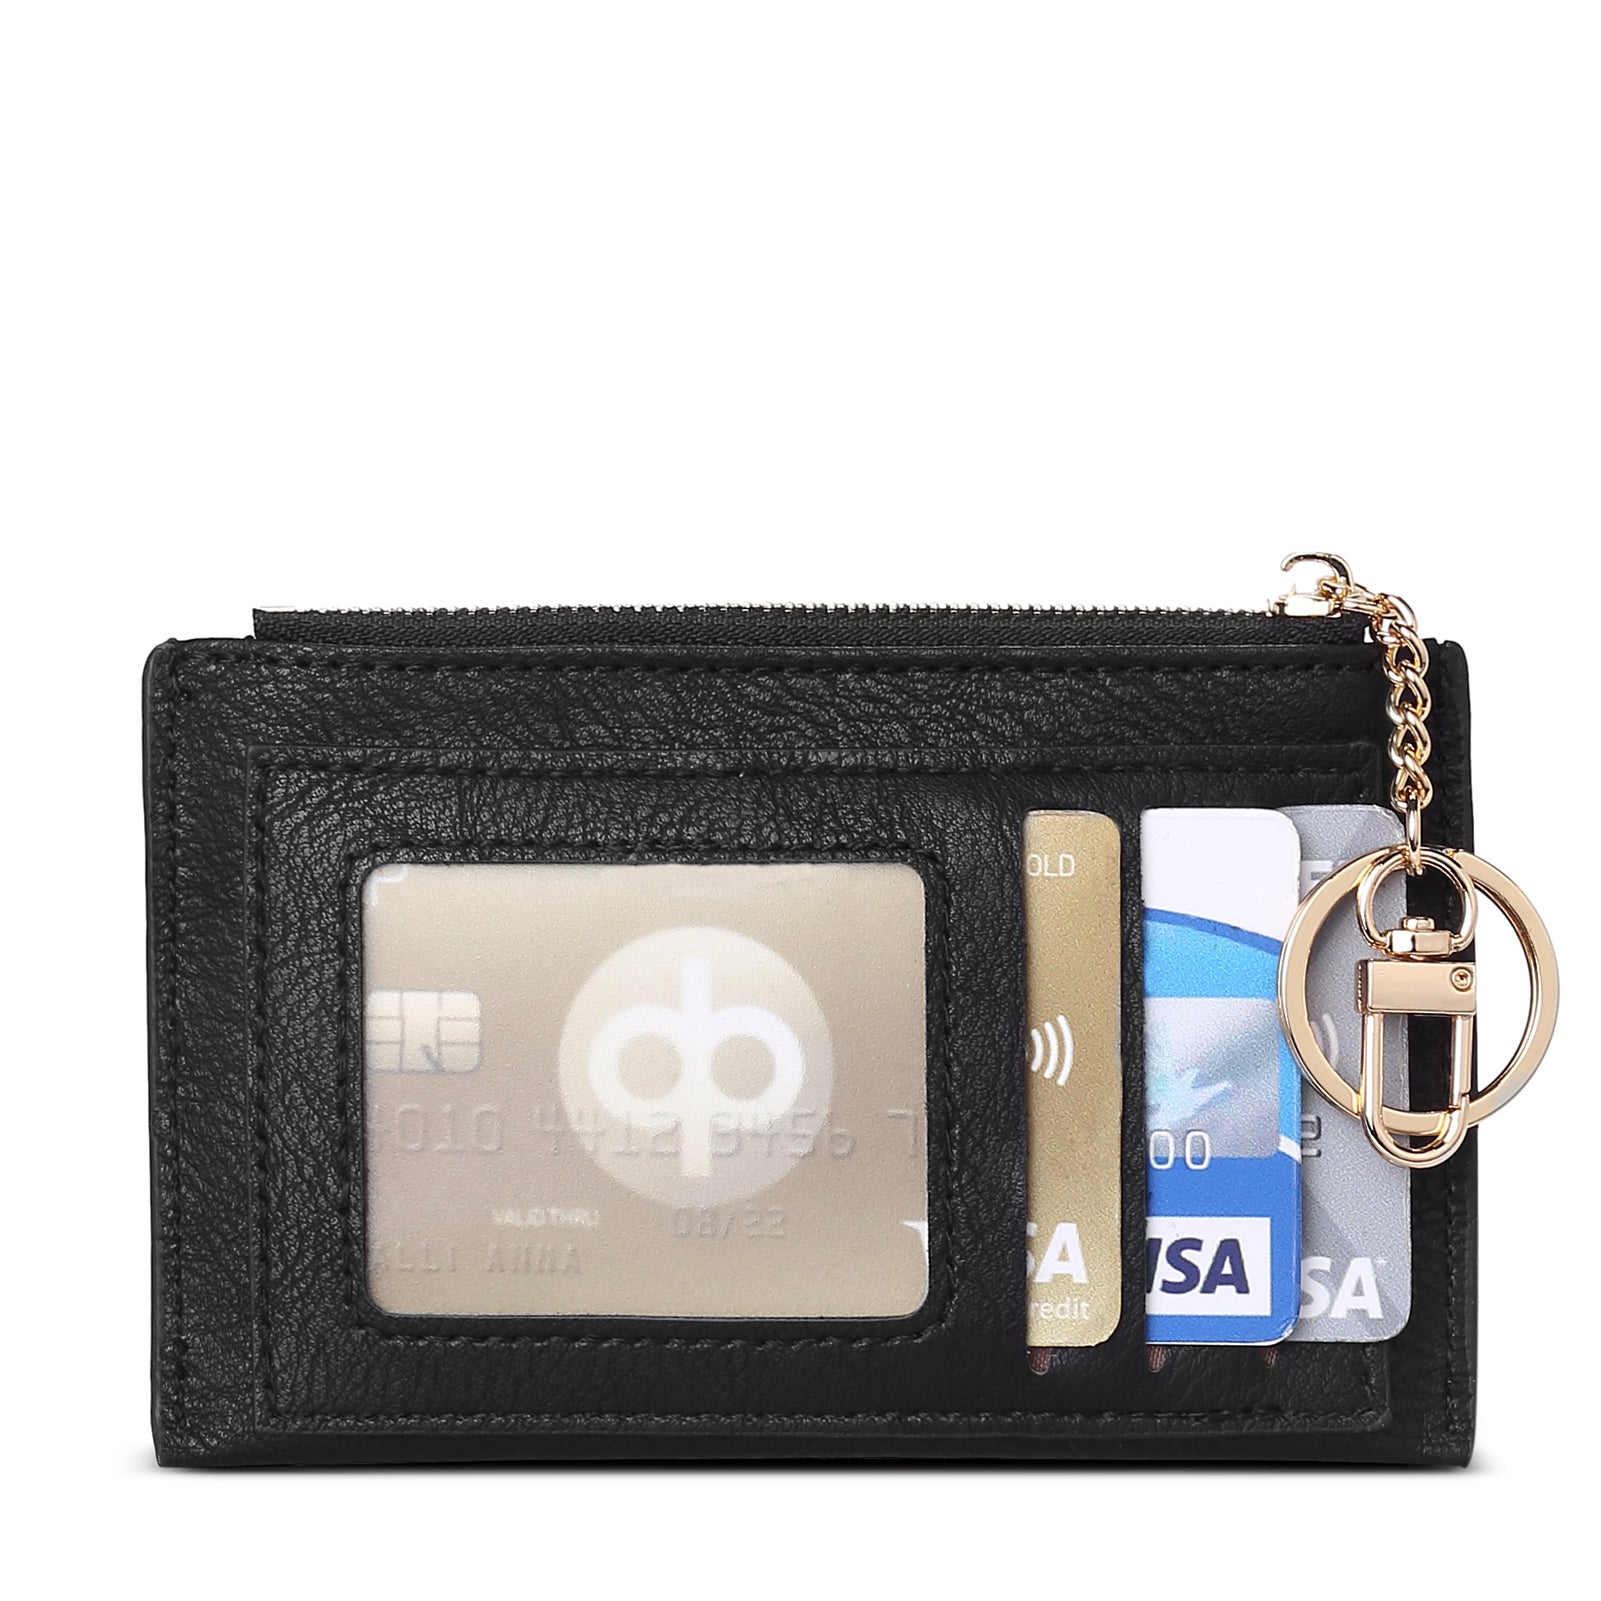 Small Leather Wallet for Women, RFID Blocking Women's Credit Card